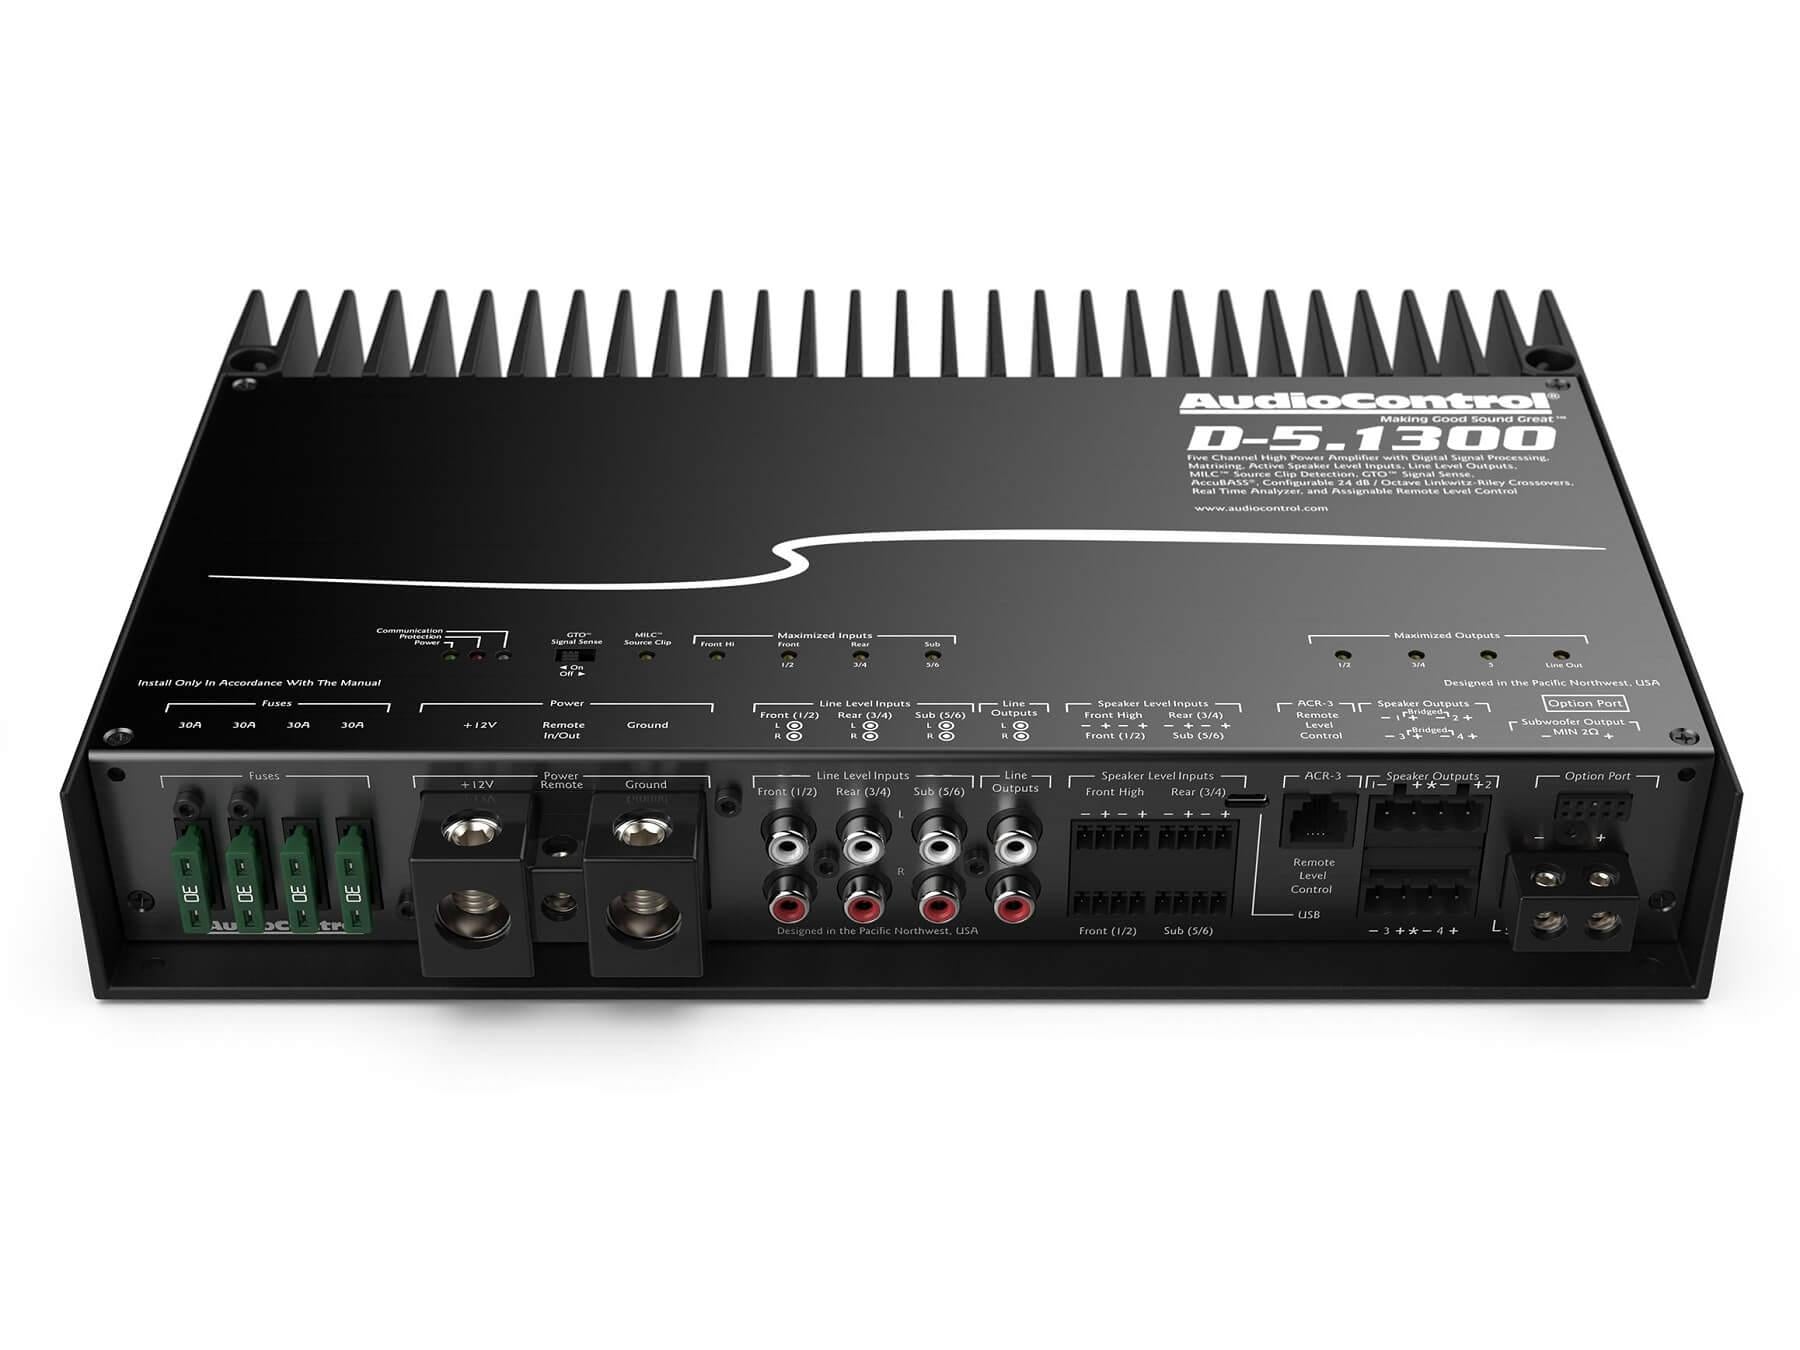 AudioControl D-5.1300 - 5 Channel Amplifier with DSP